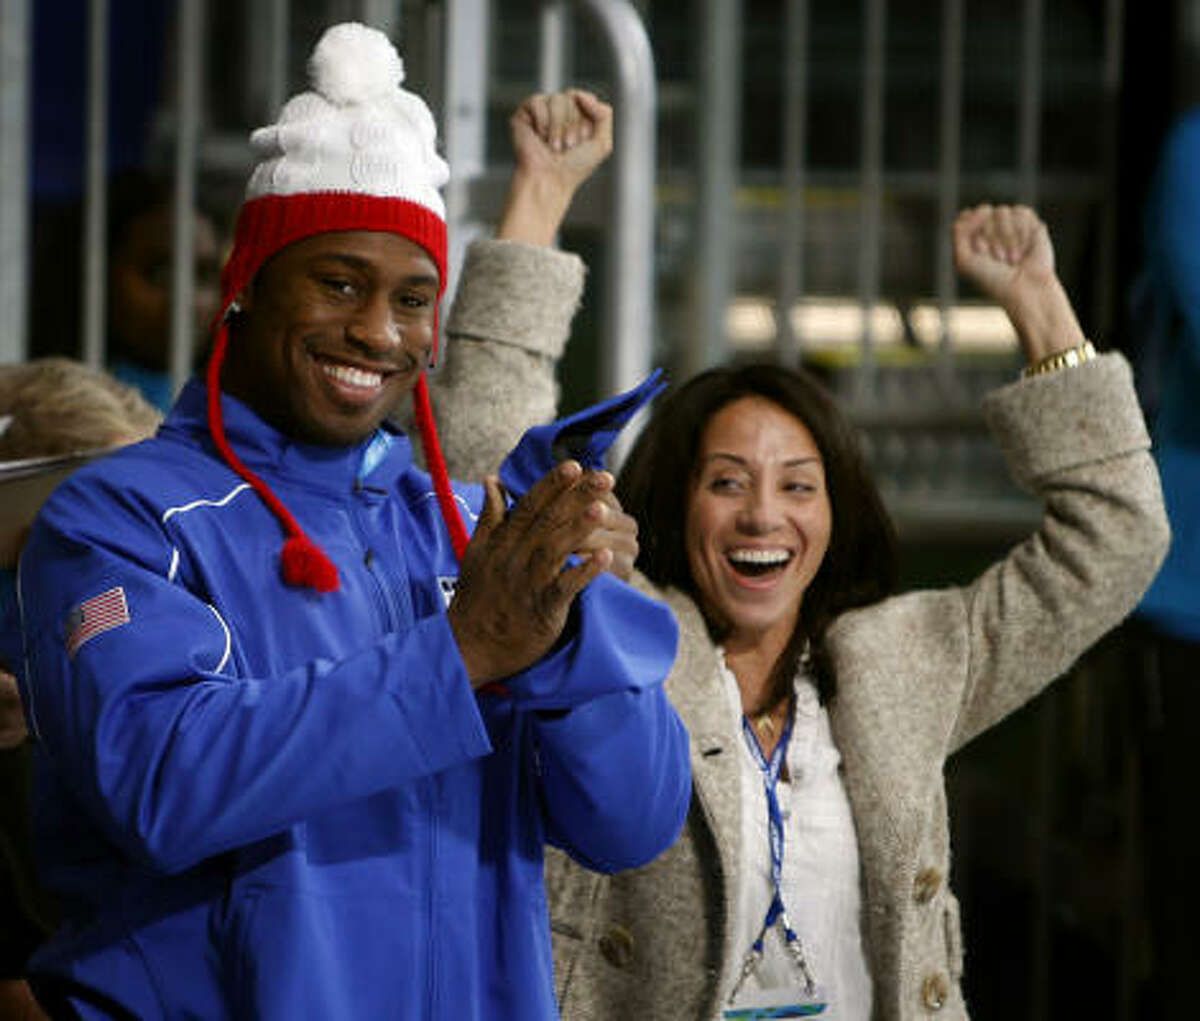 As honorary captain of the U.S. curling team, San Francisco 49ers tight end Vernon Davis, along with his assistant, Sasha Taylor, takes special delight in watching the Americans capture their first victory of the 2010 Winter Games on Friday.